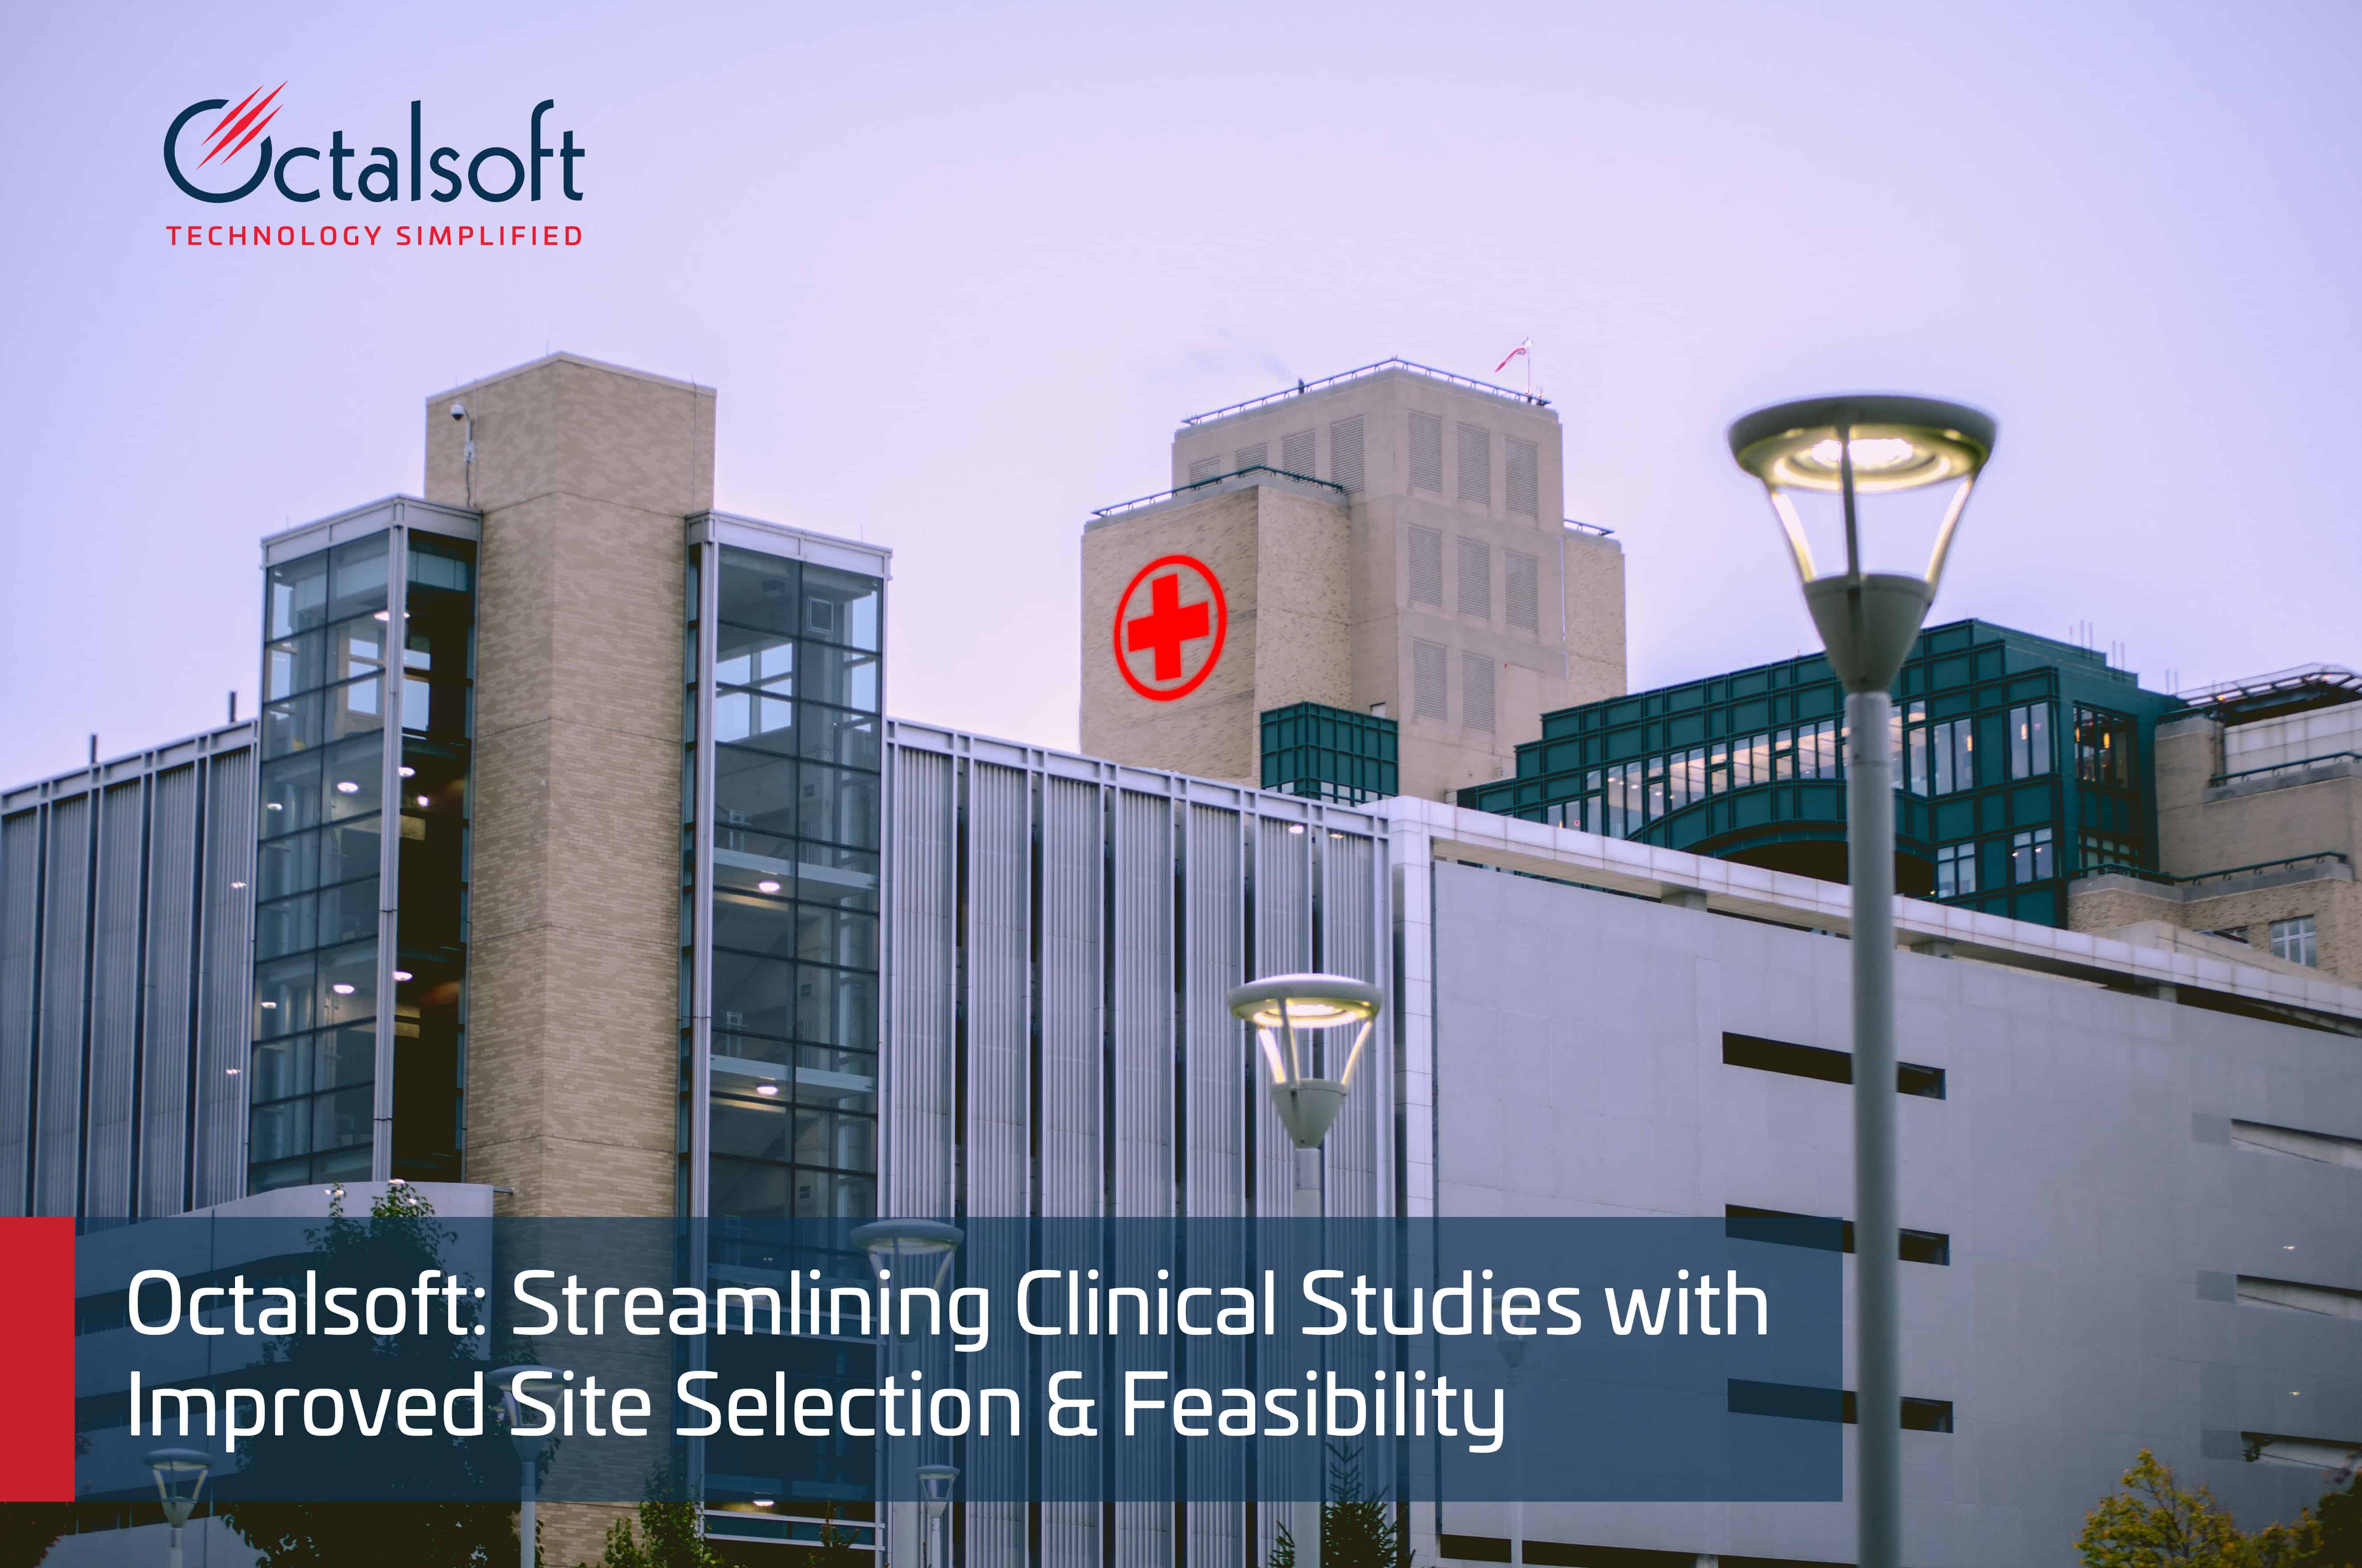 Octalsoft: Streamlining Clinical Studies with Improved Site Selection & Feasibility